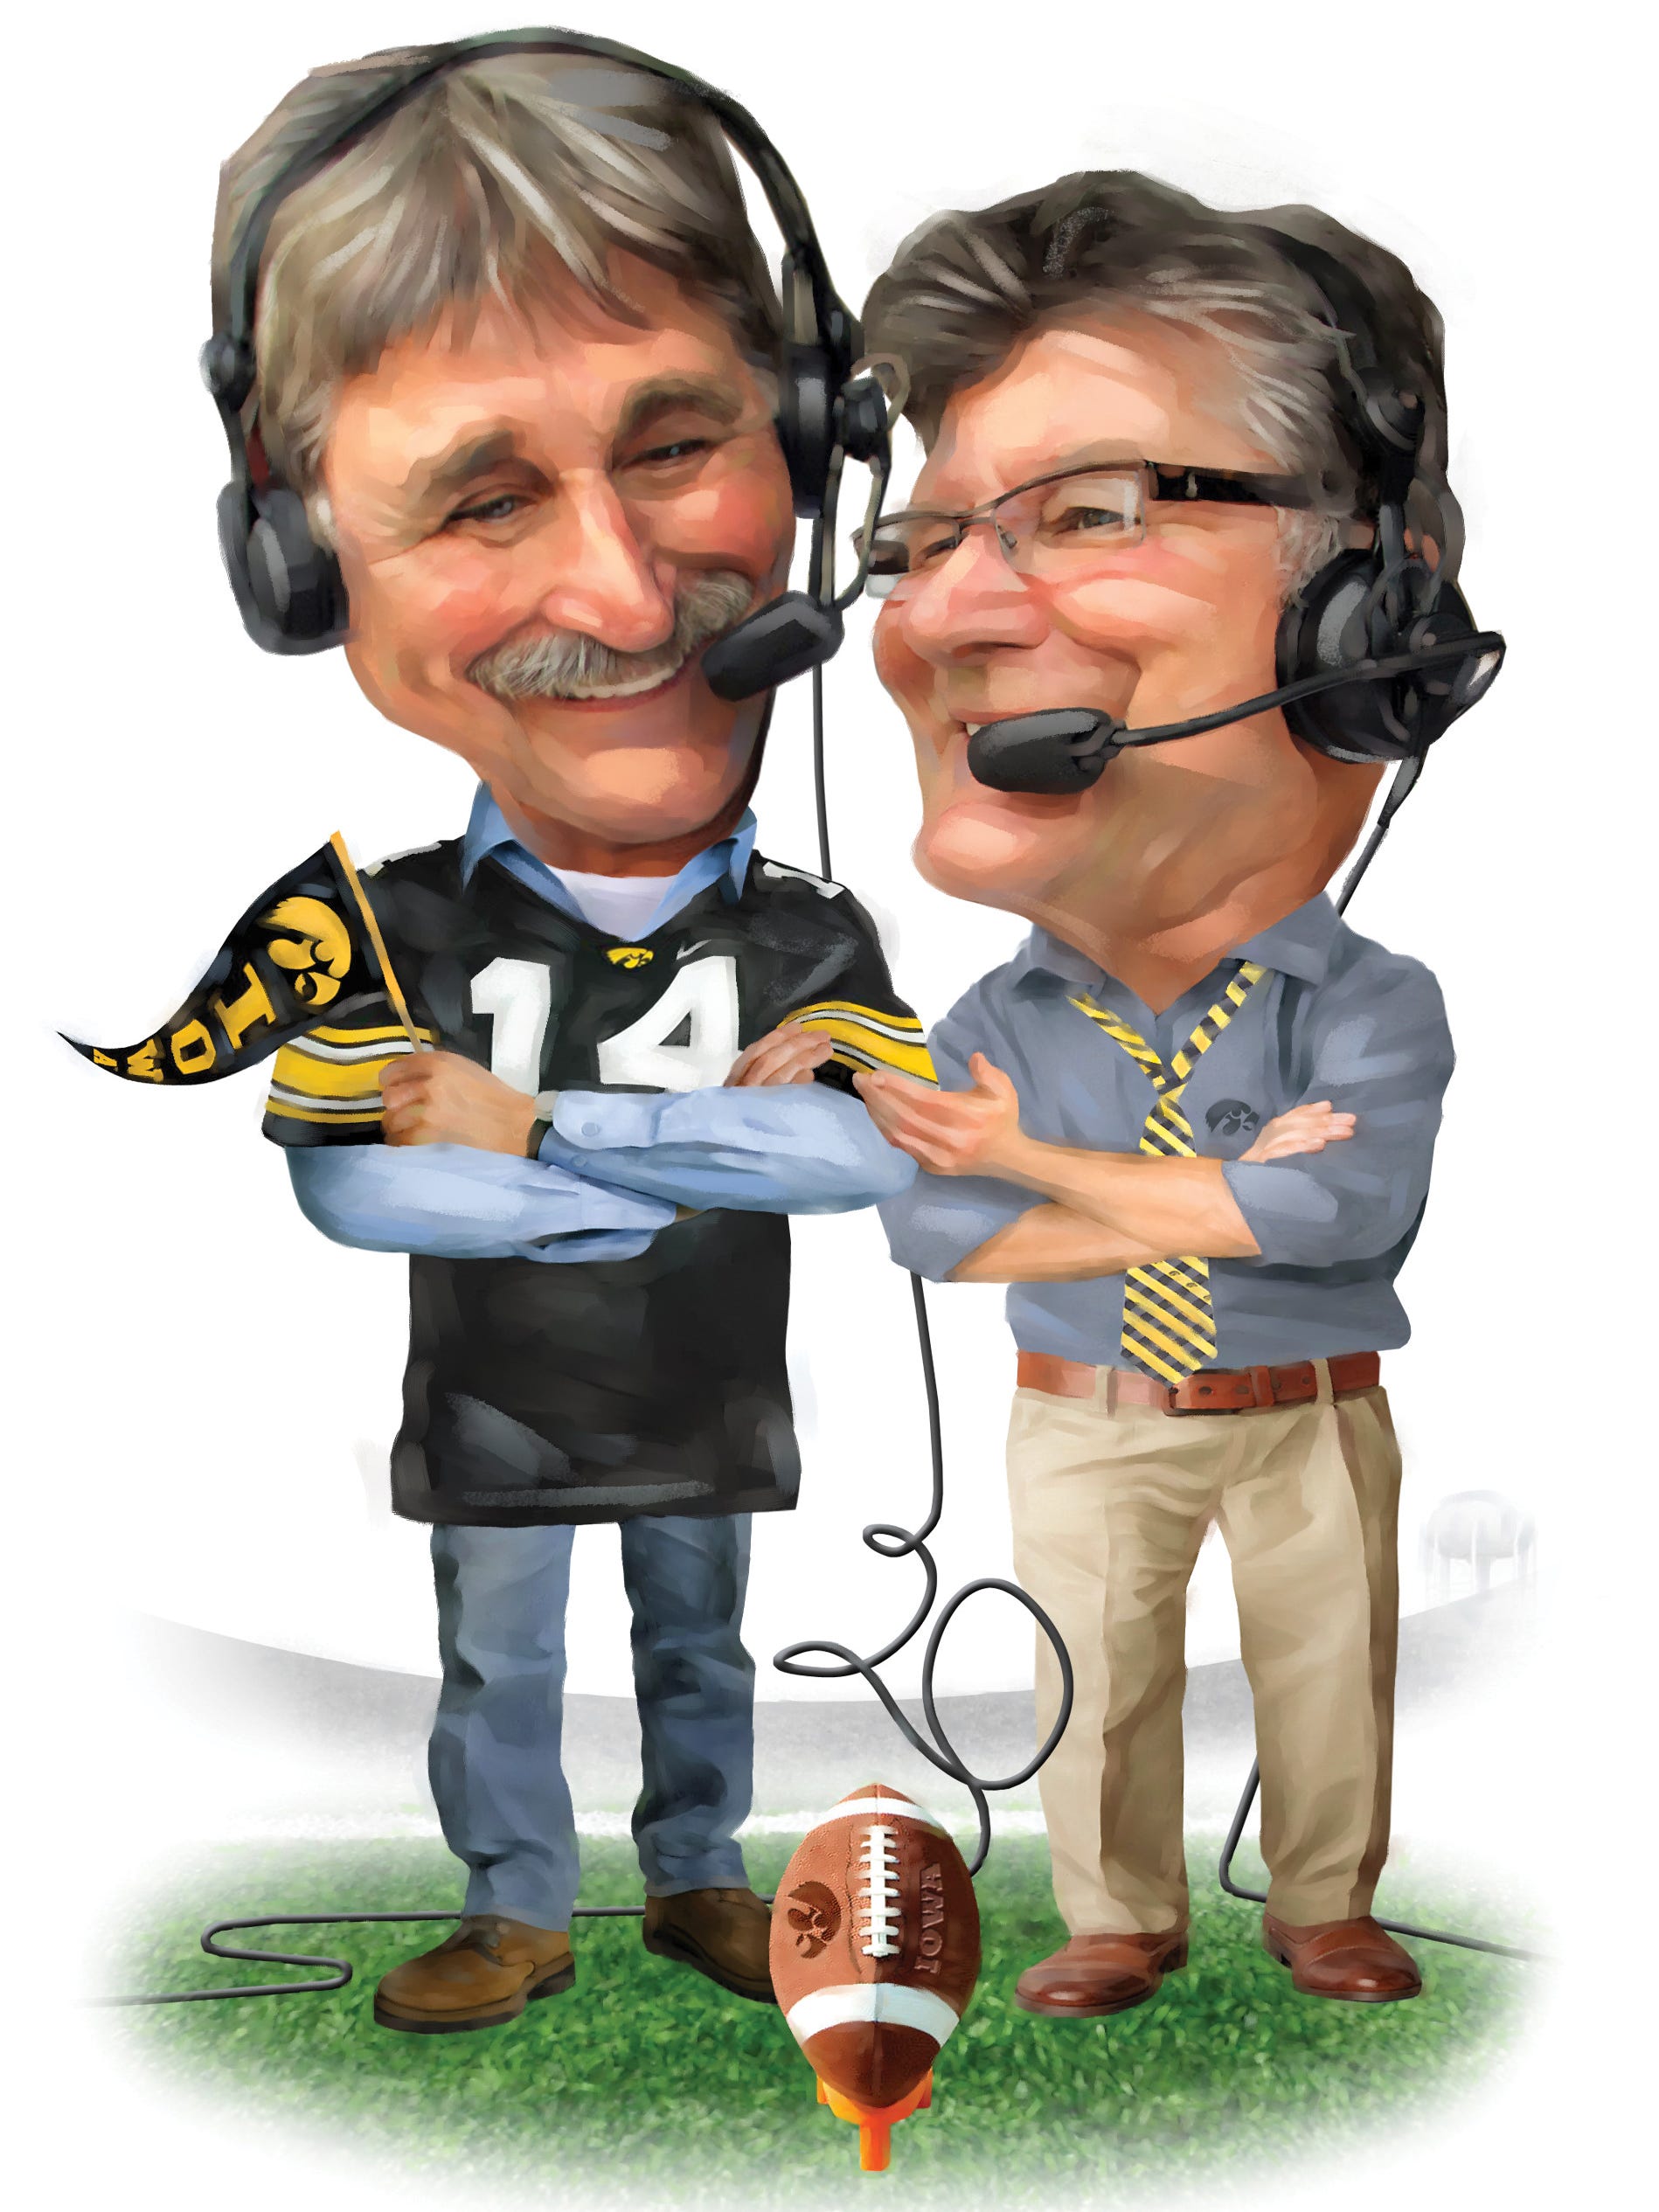 An illustration of Hawkeye football radio announcers Ed Podolak and Gary Dolphin as they enter their 20th season in the booth together.